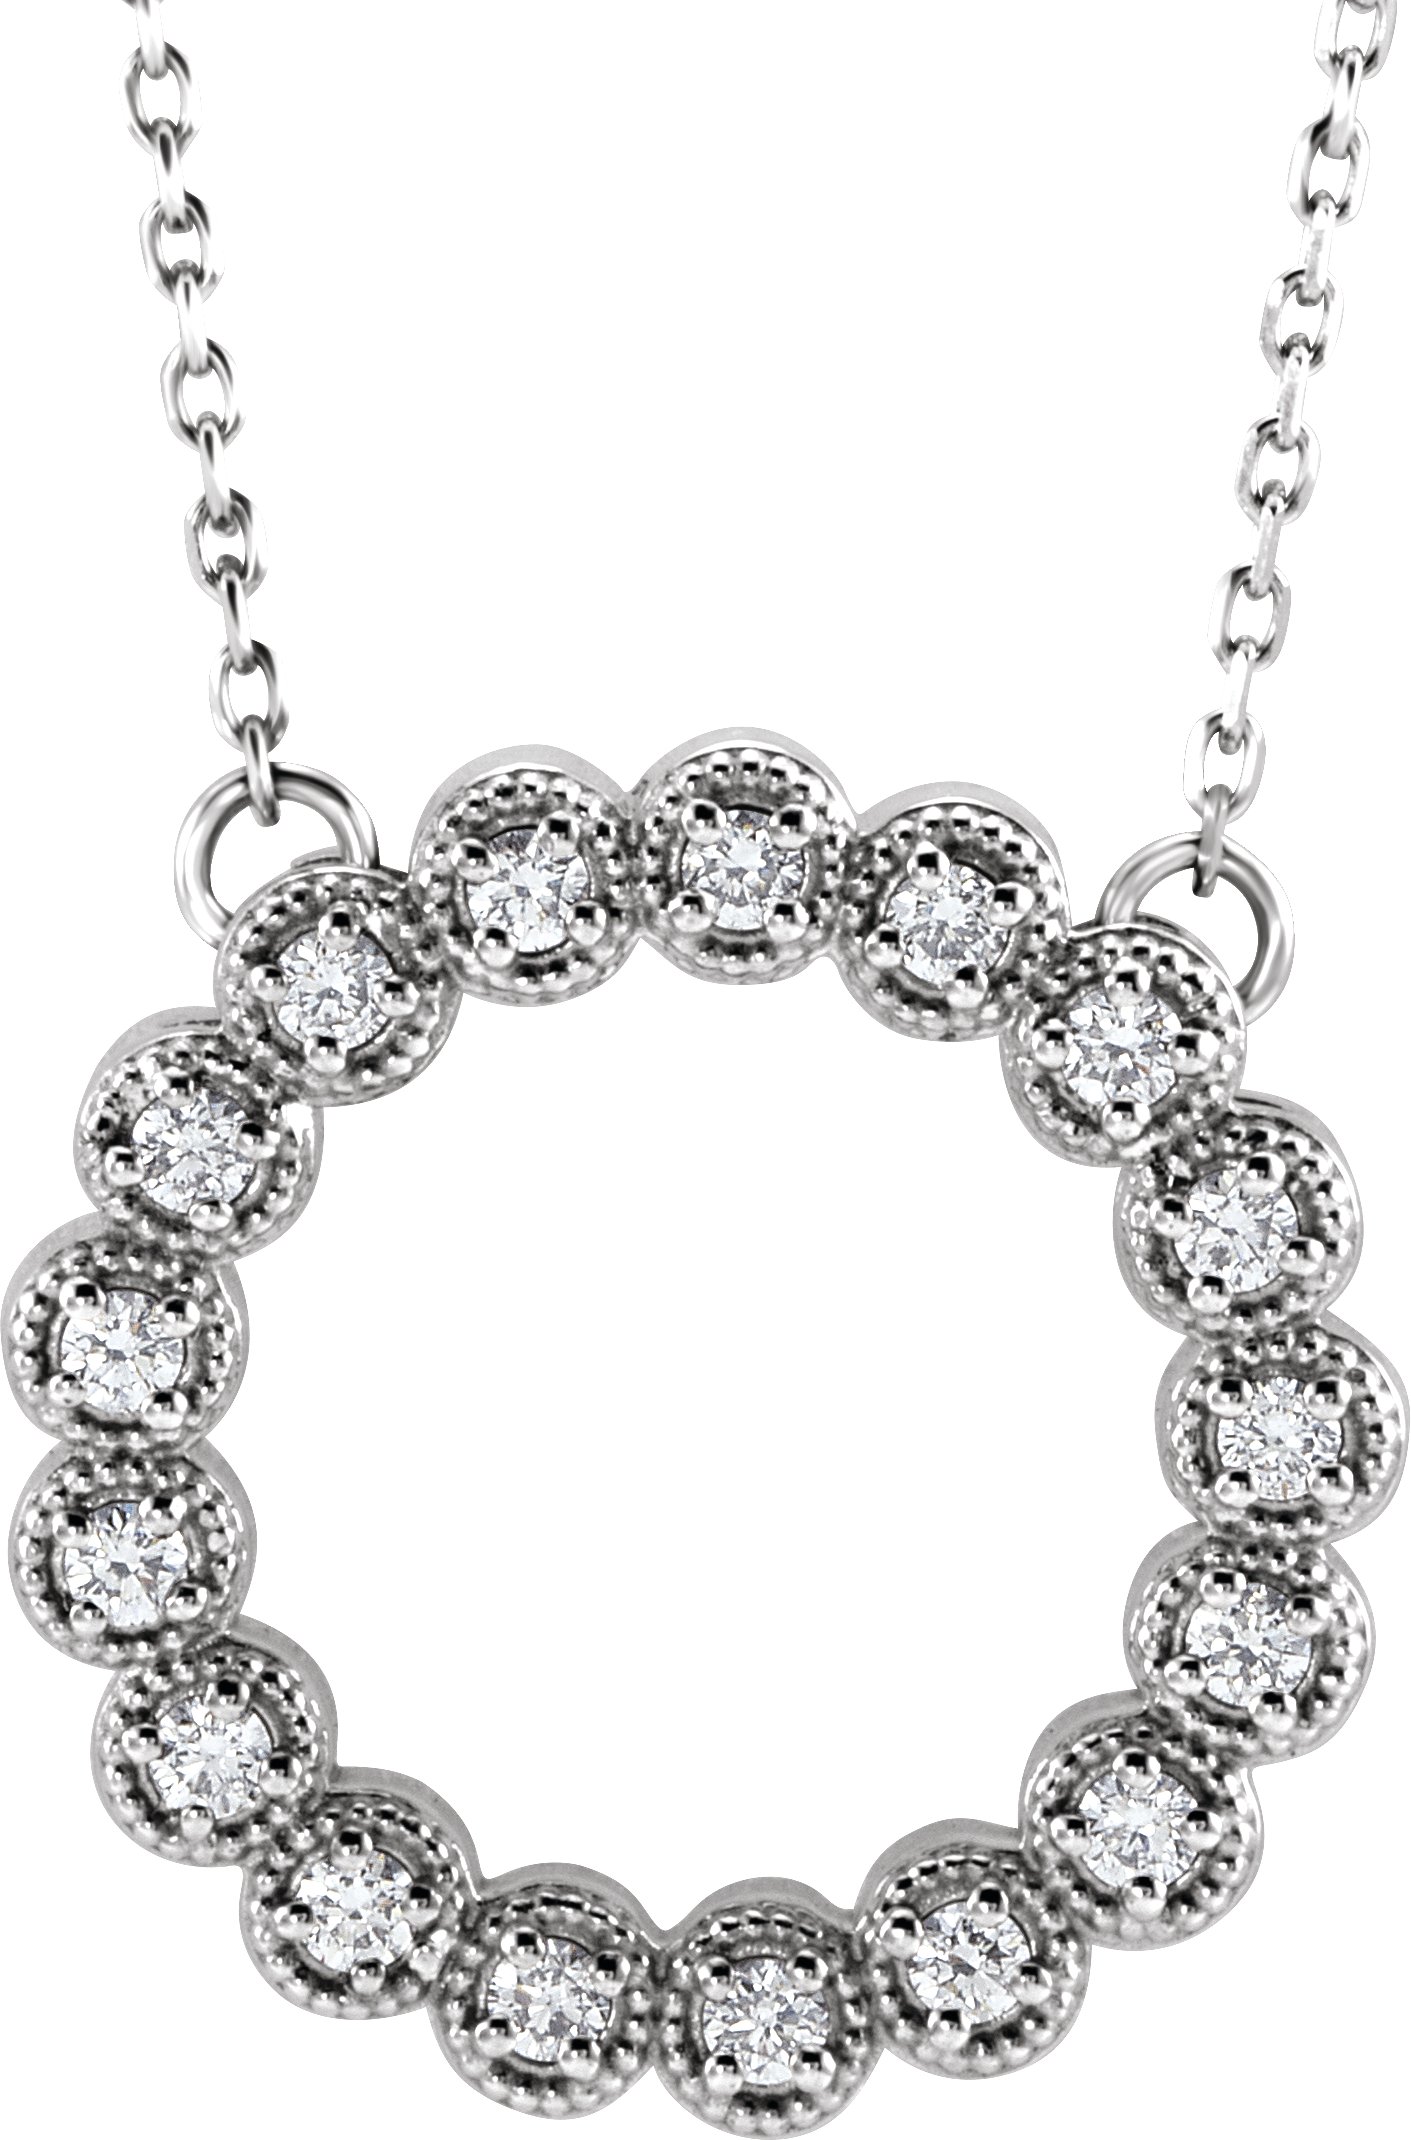 Accented Circle Necklace